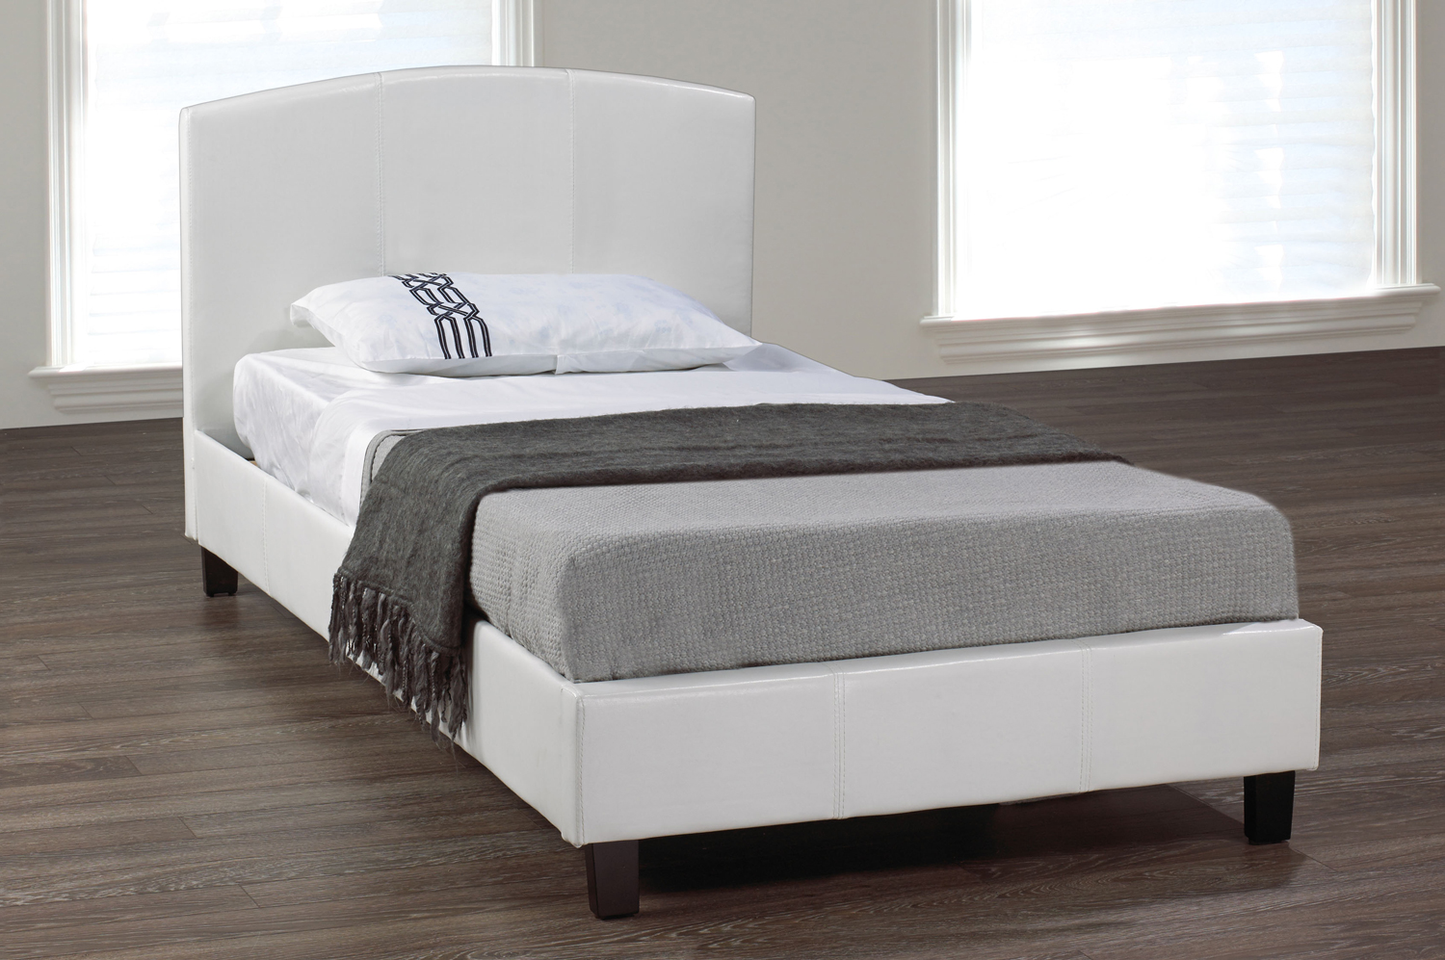 Queen Size Espresso Bed in different sizes